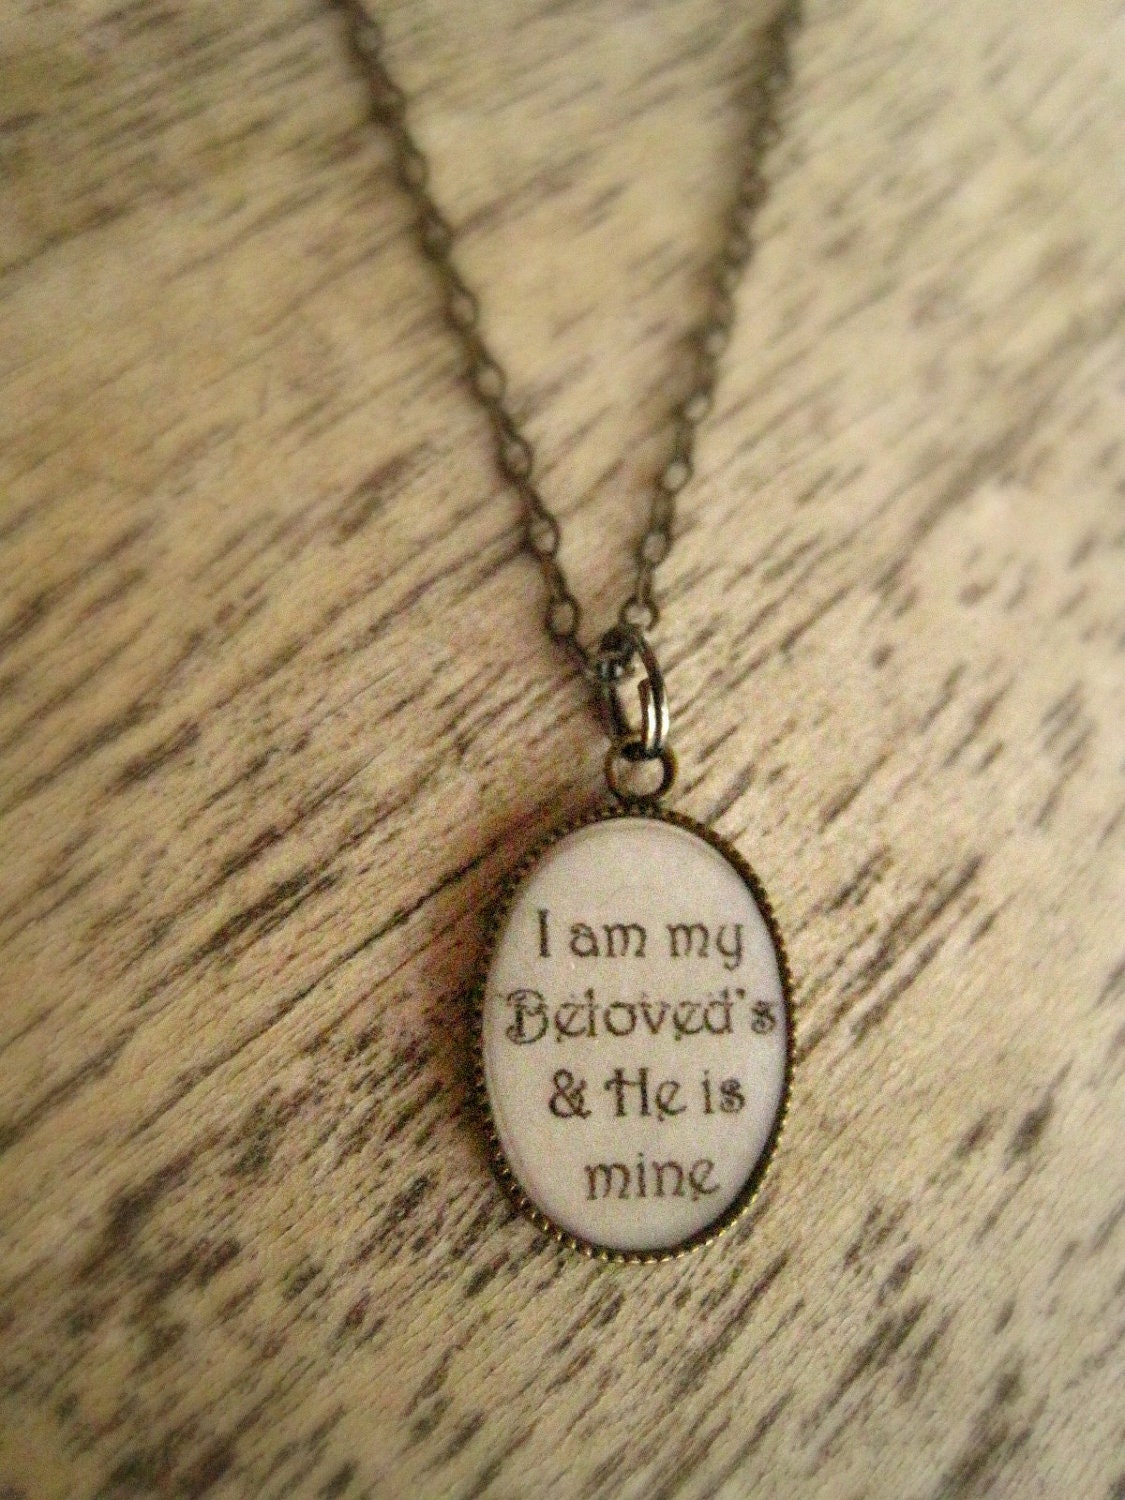 Antique Brass Resin Necklace- "I Am My Beloveds & He Is Mine" - BlissfulThinking09